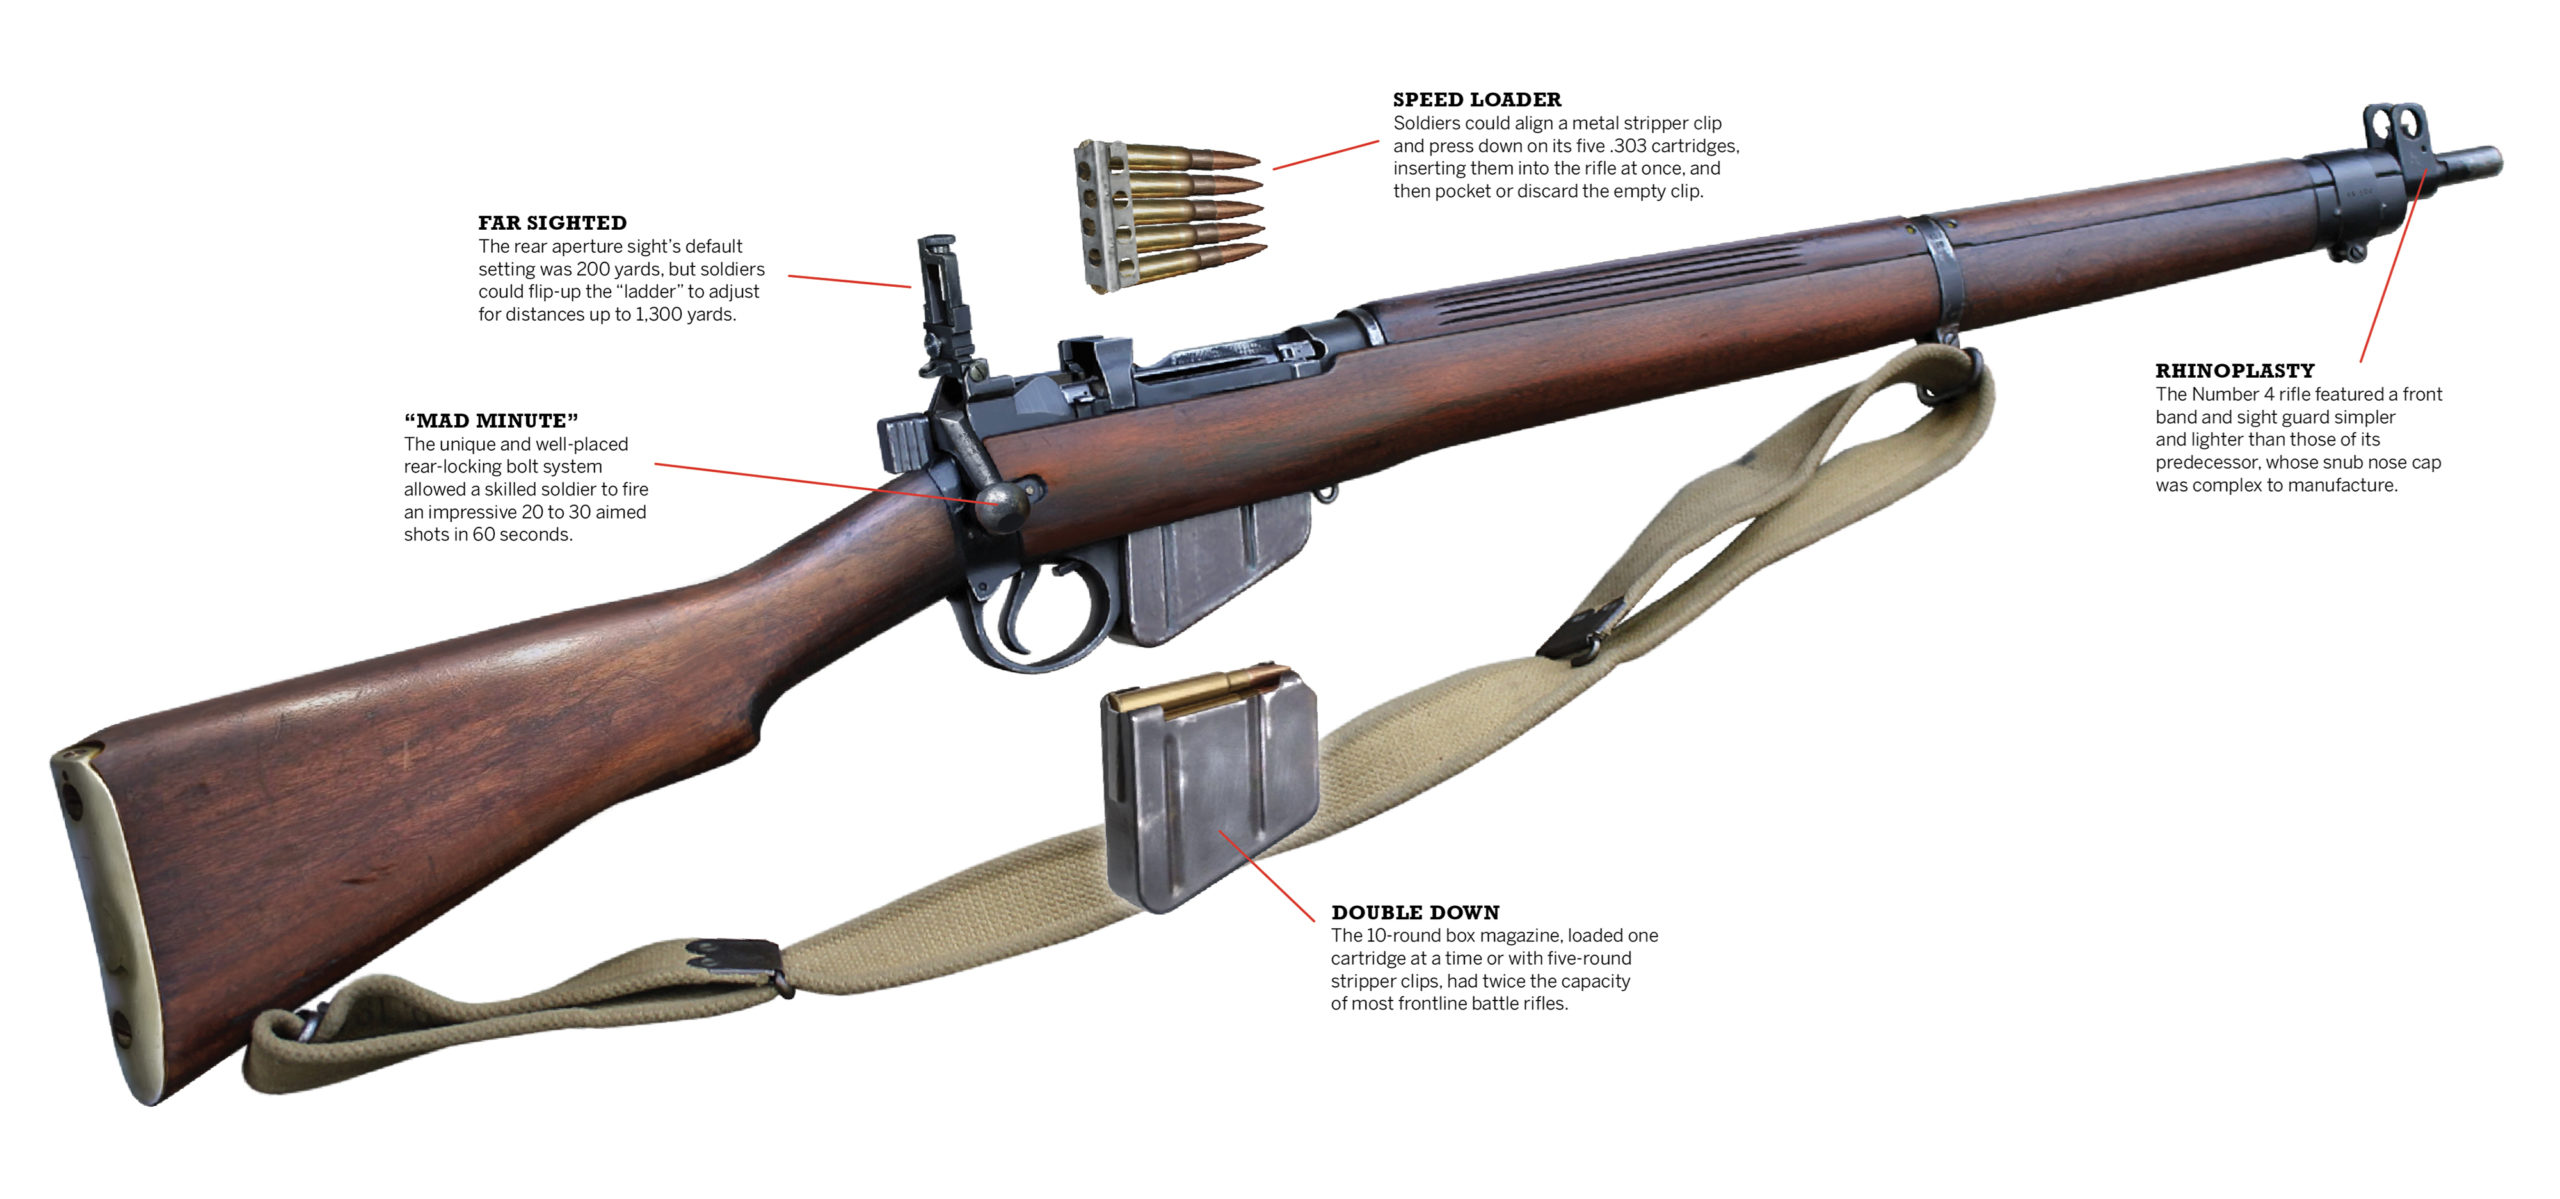 The Lee-Enfield Put a SMLE on Tommies' Faces and Fear in the